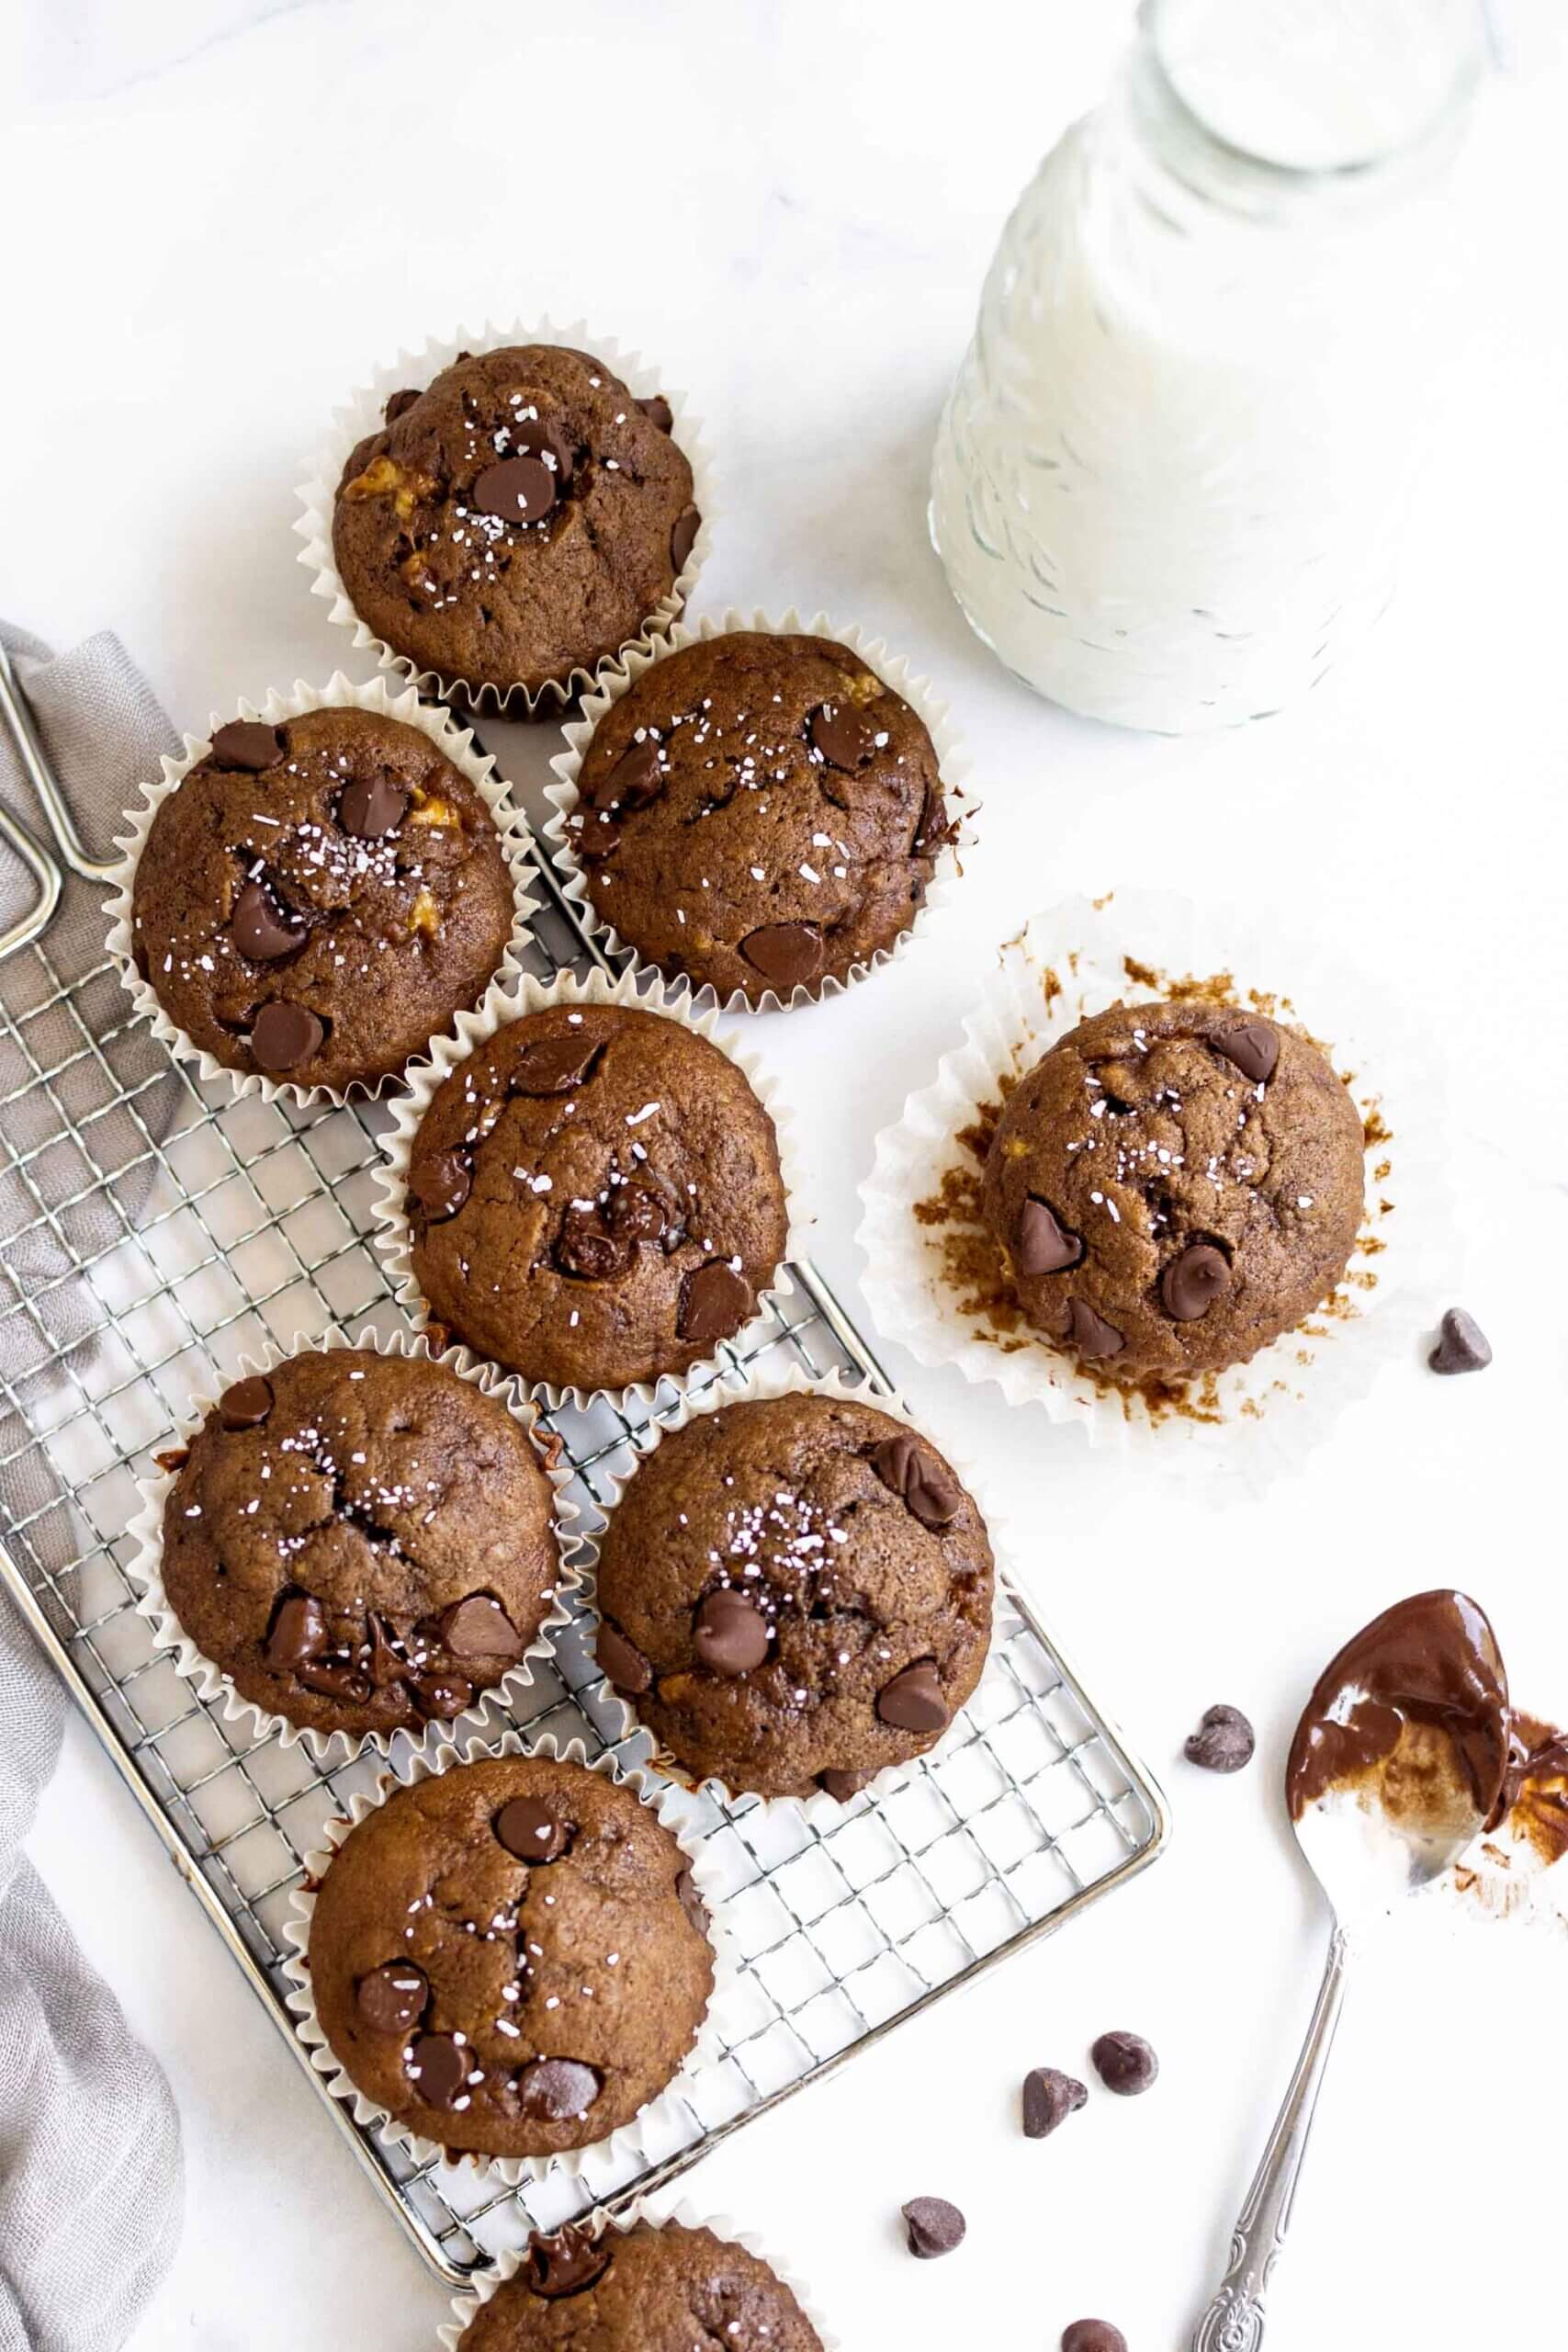 Easy double chocolate banana muffins on a tray with milk